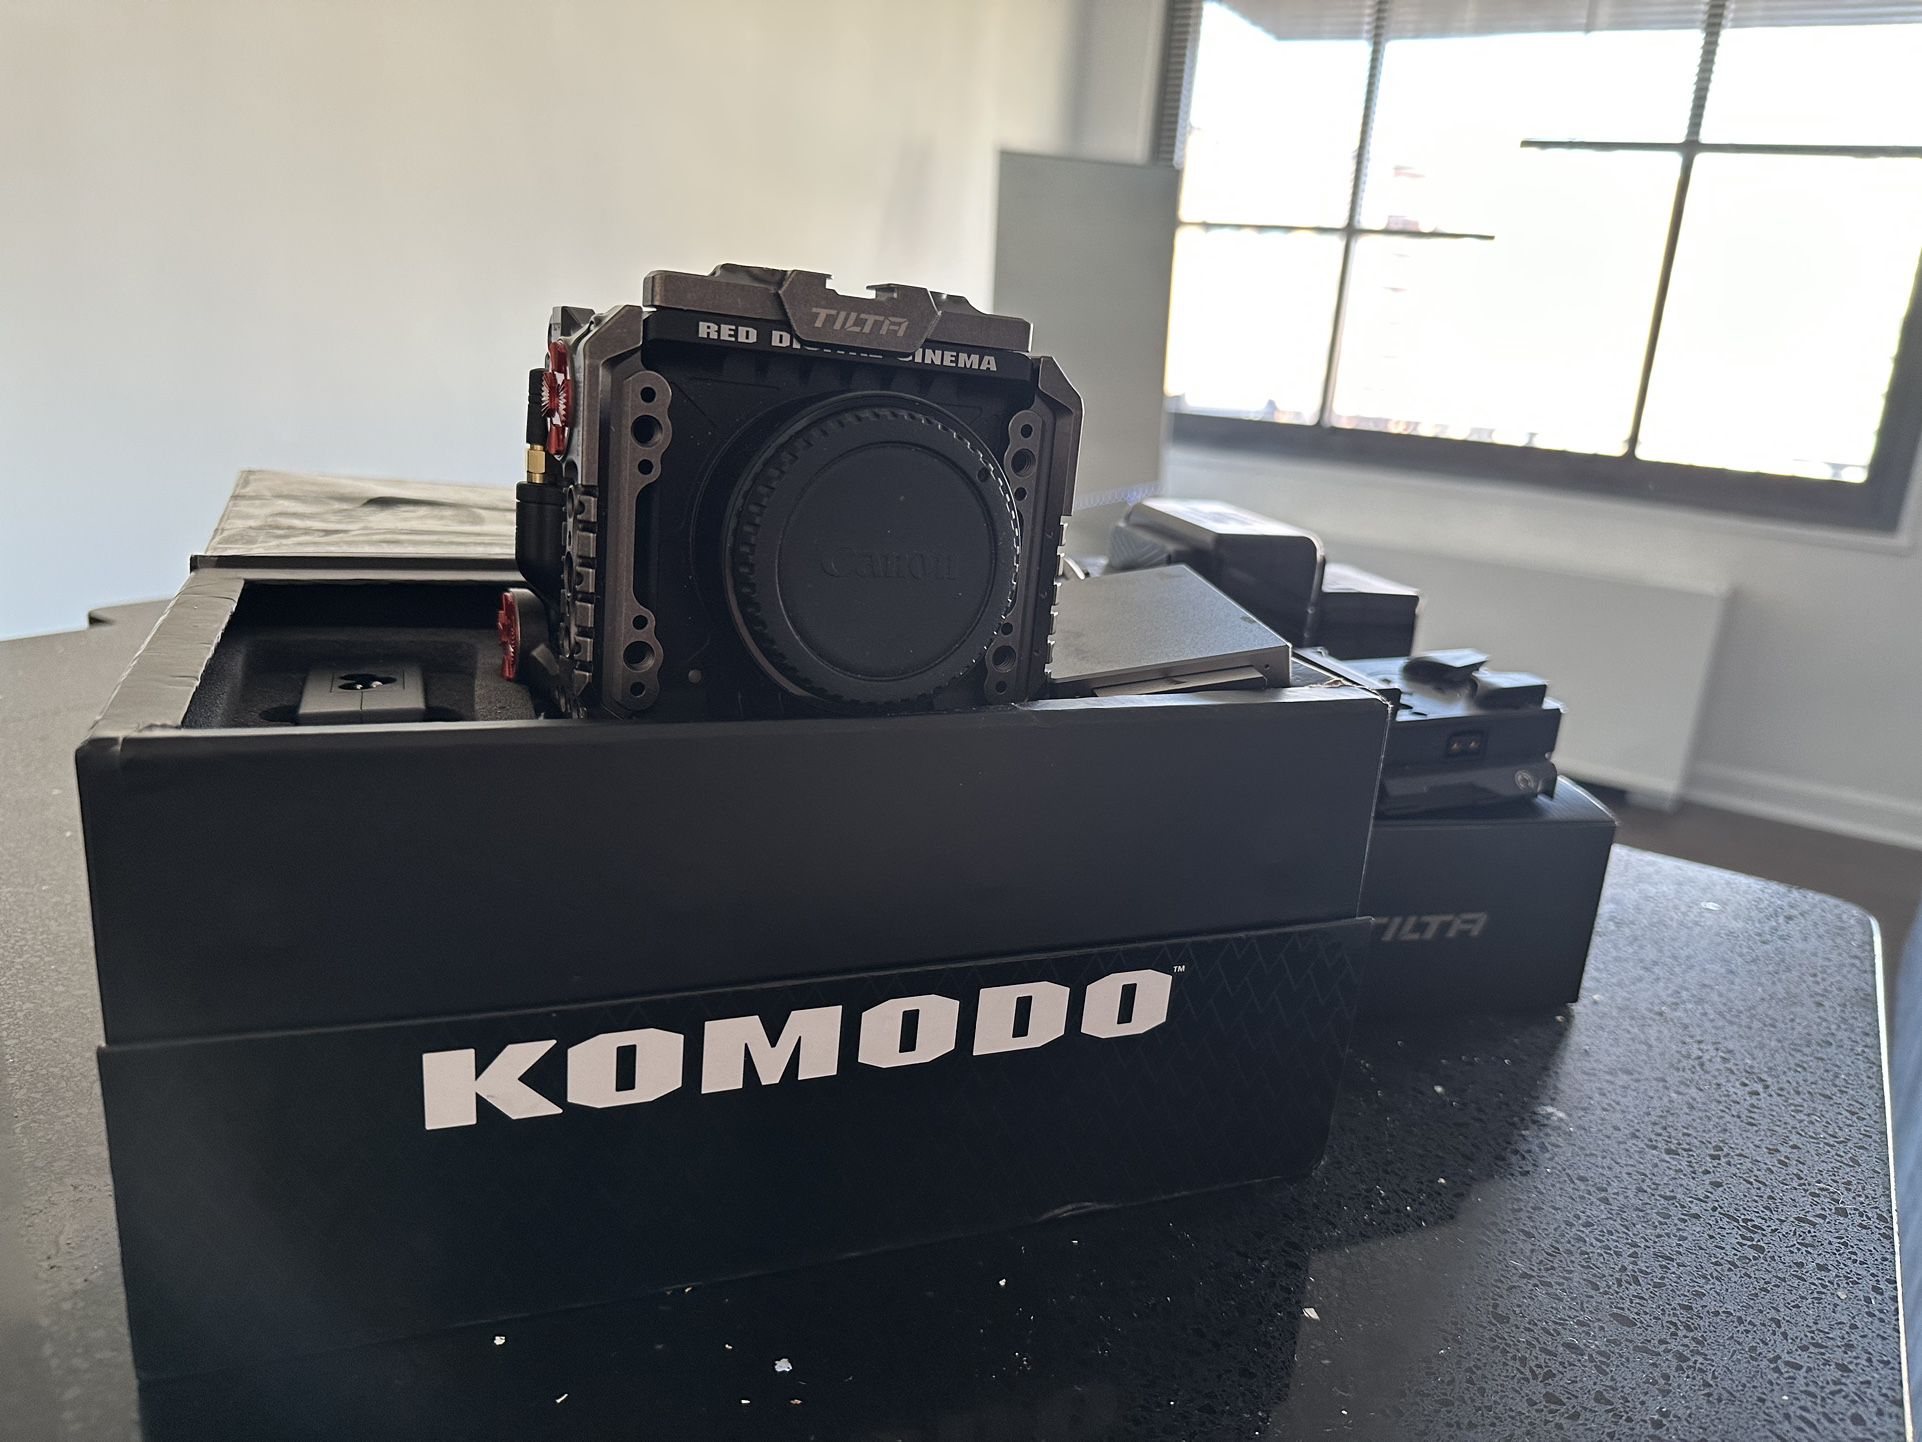 RED KOMODO 6K -I Bought Only 2 months Before -3 year guarantee-New Brand